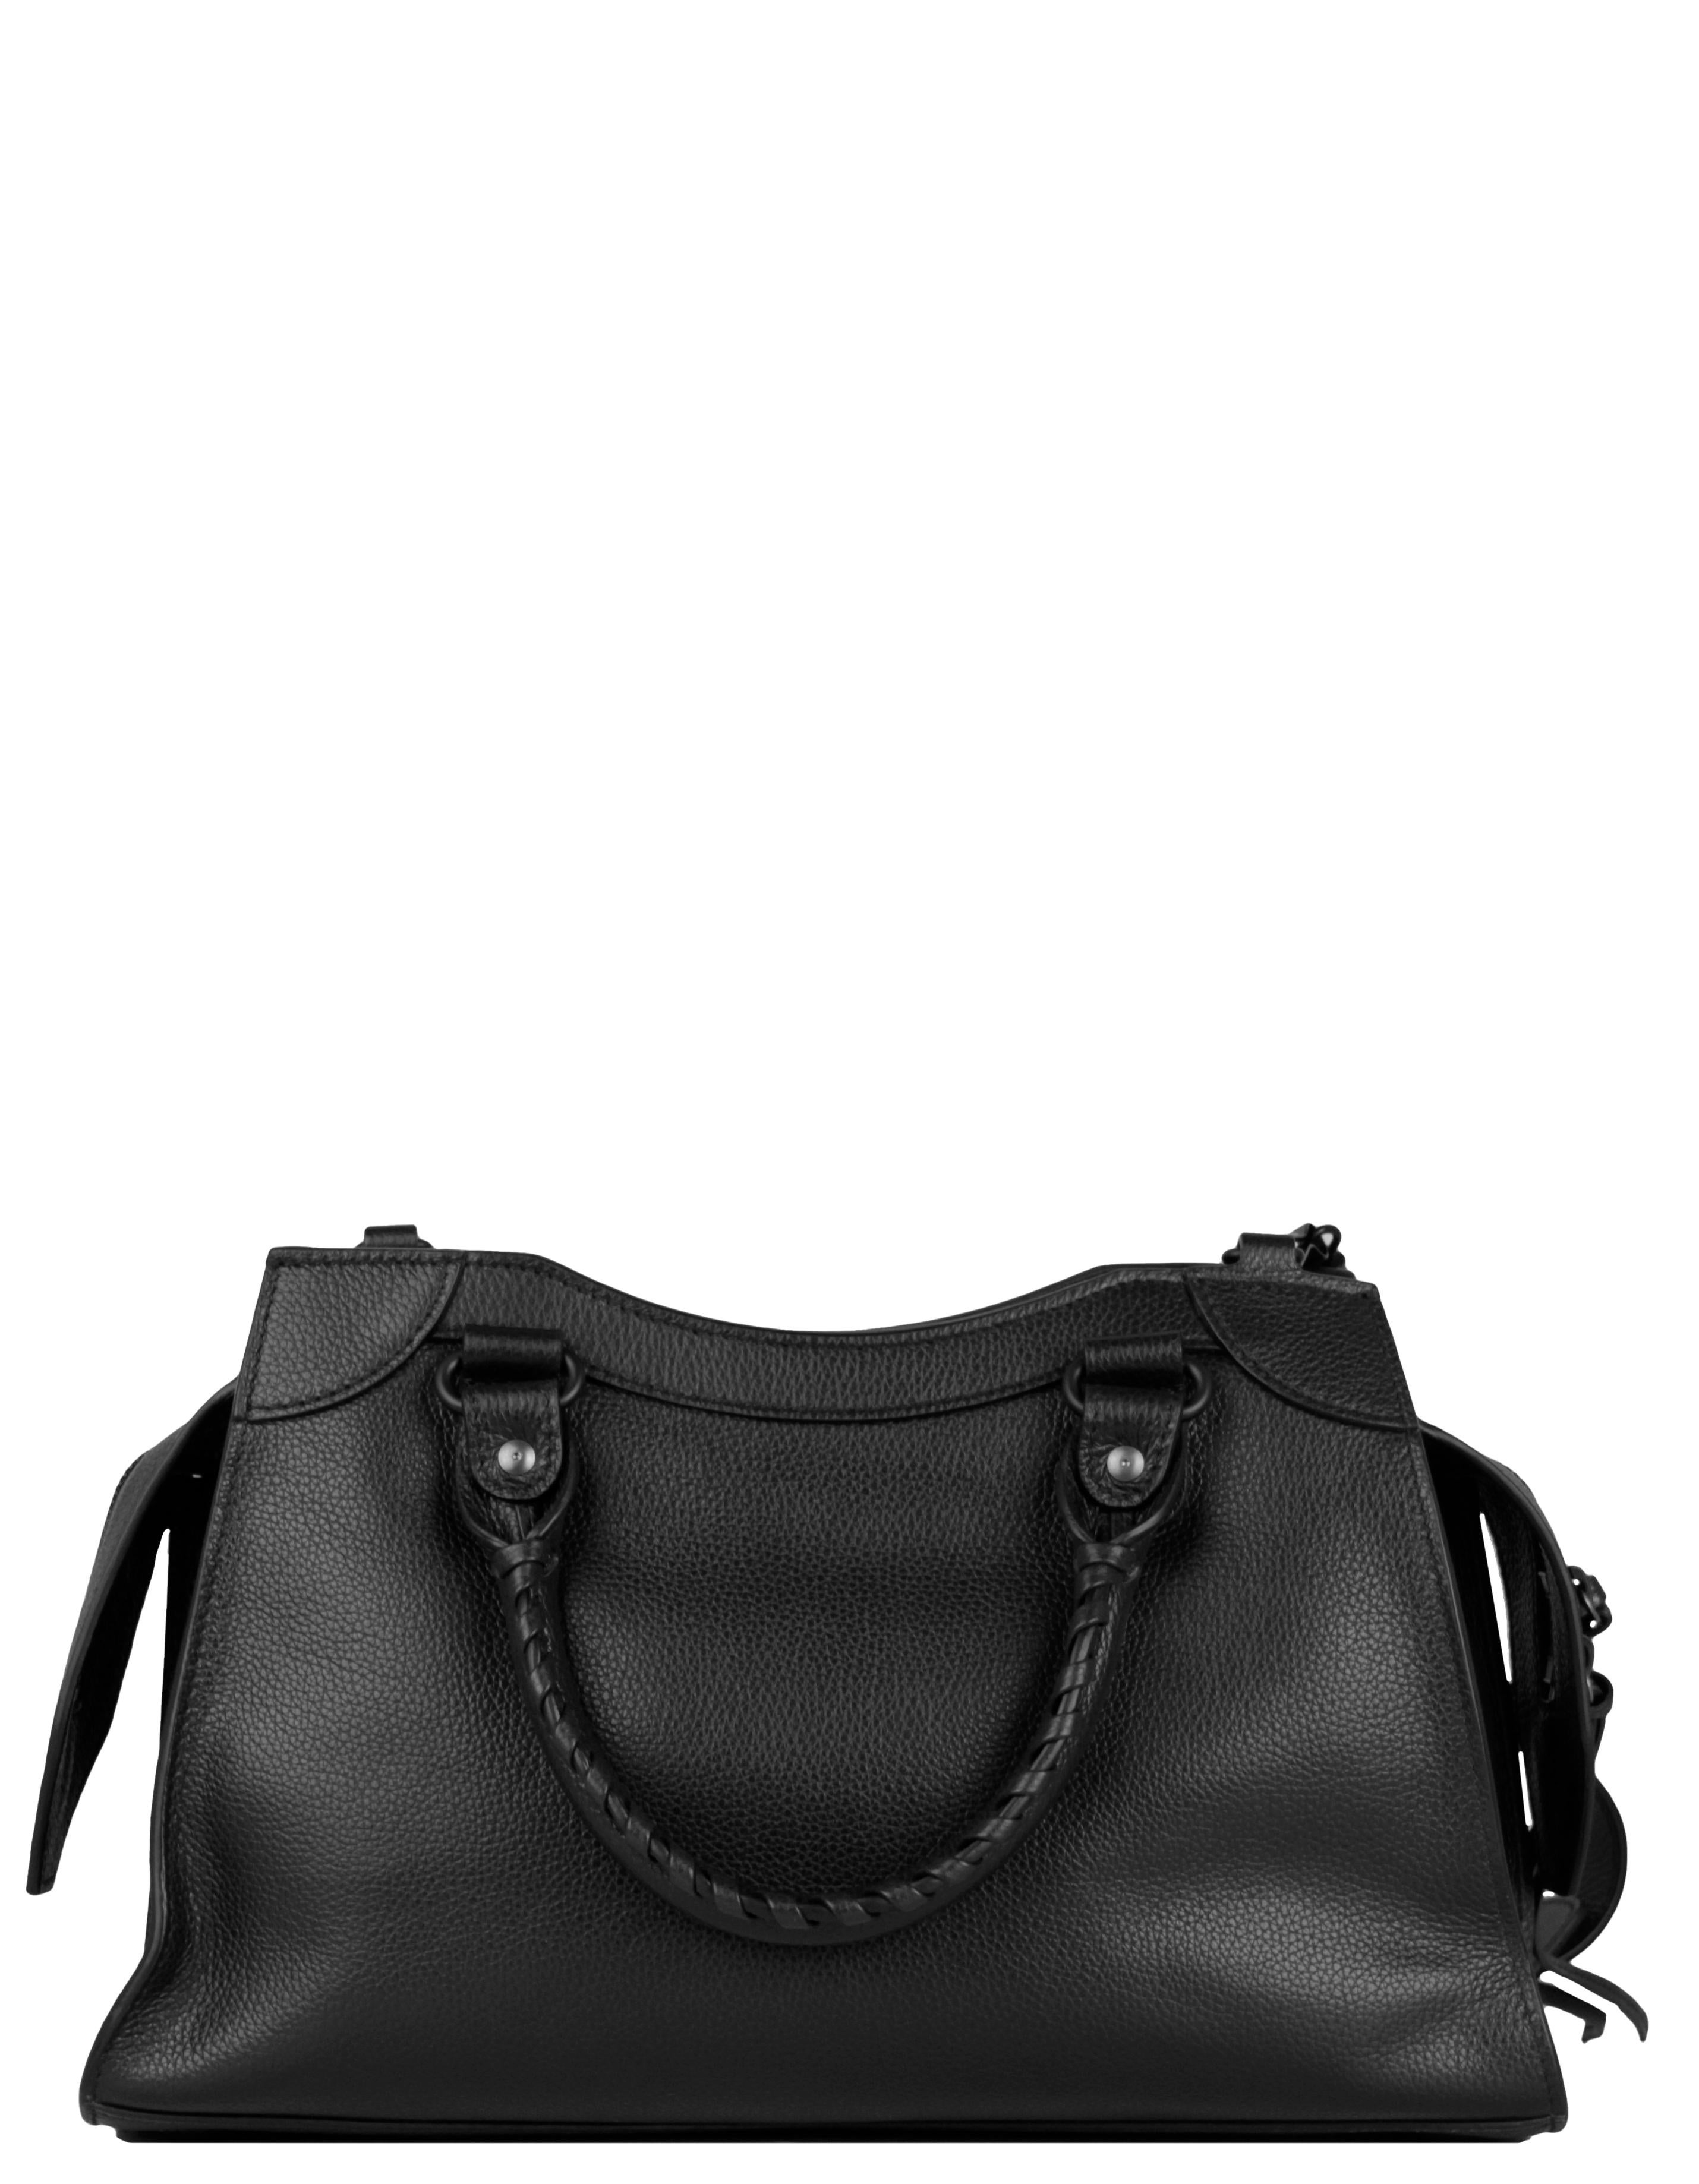 Balenciaga Black Grained Calfskin Leather Neo Classic Hardware S City Bag In Excellent Condition For Sale In New York, NY